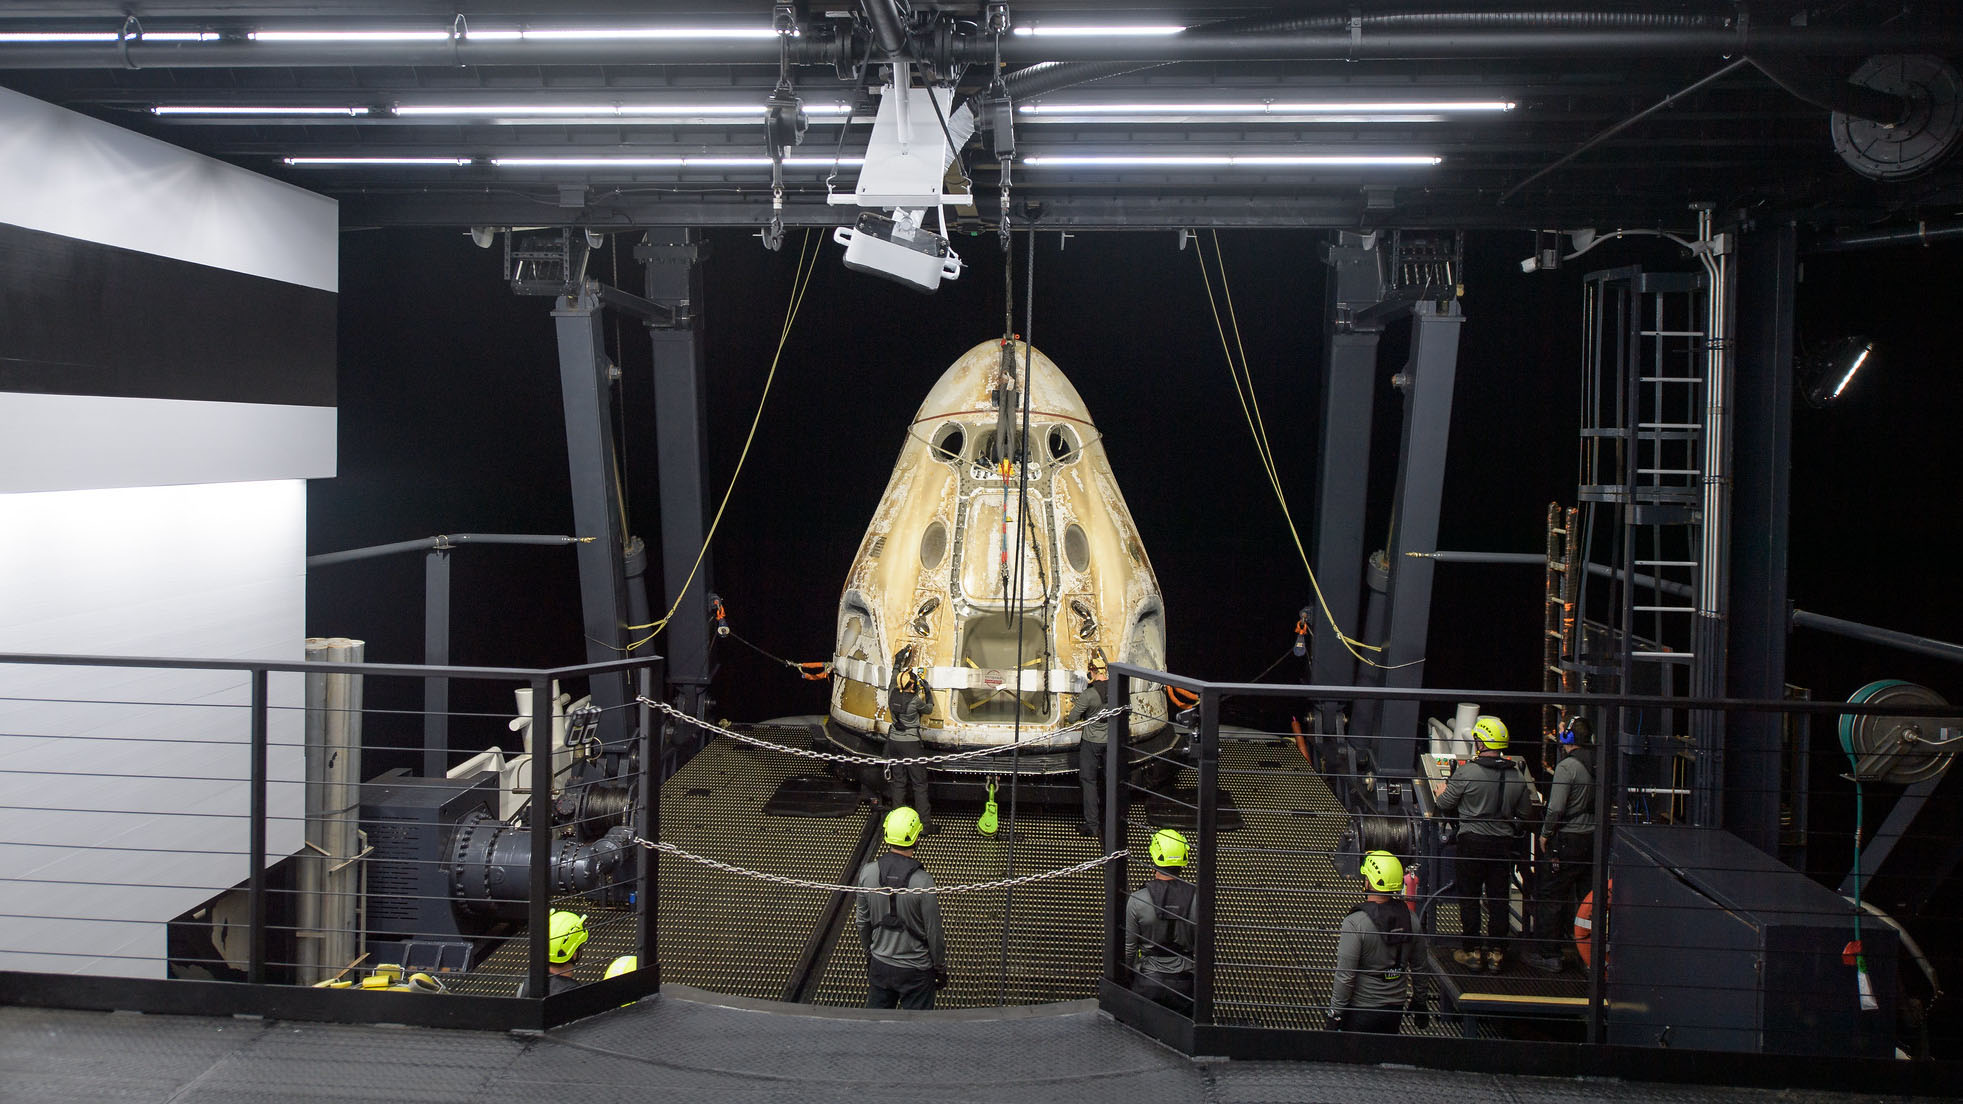 Support teams work around the SpaceX Crew Dragon Resilience spacecraft shortly after it splashed down in the Gulf of Mexico on May 2, 2021.